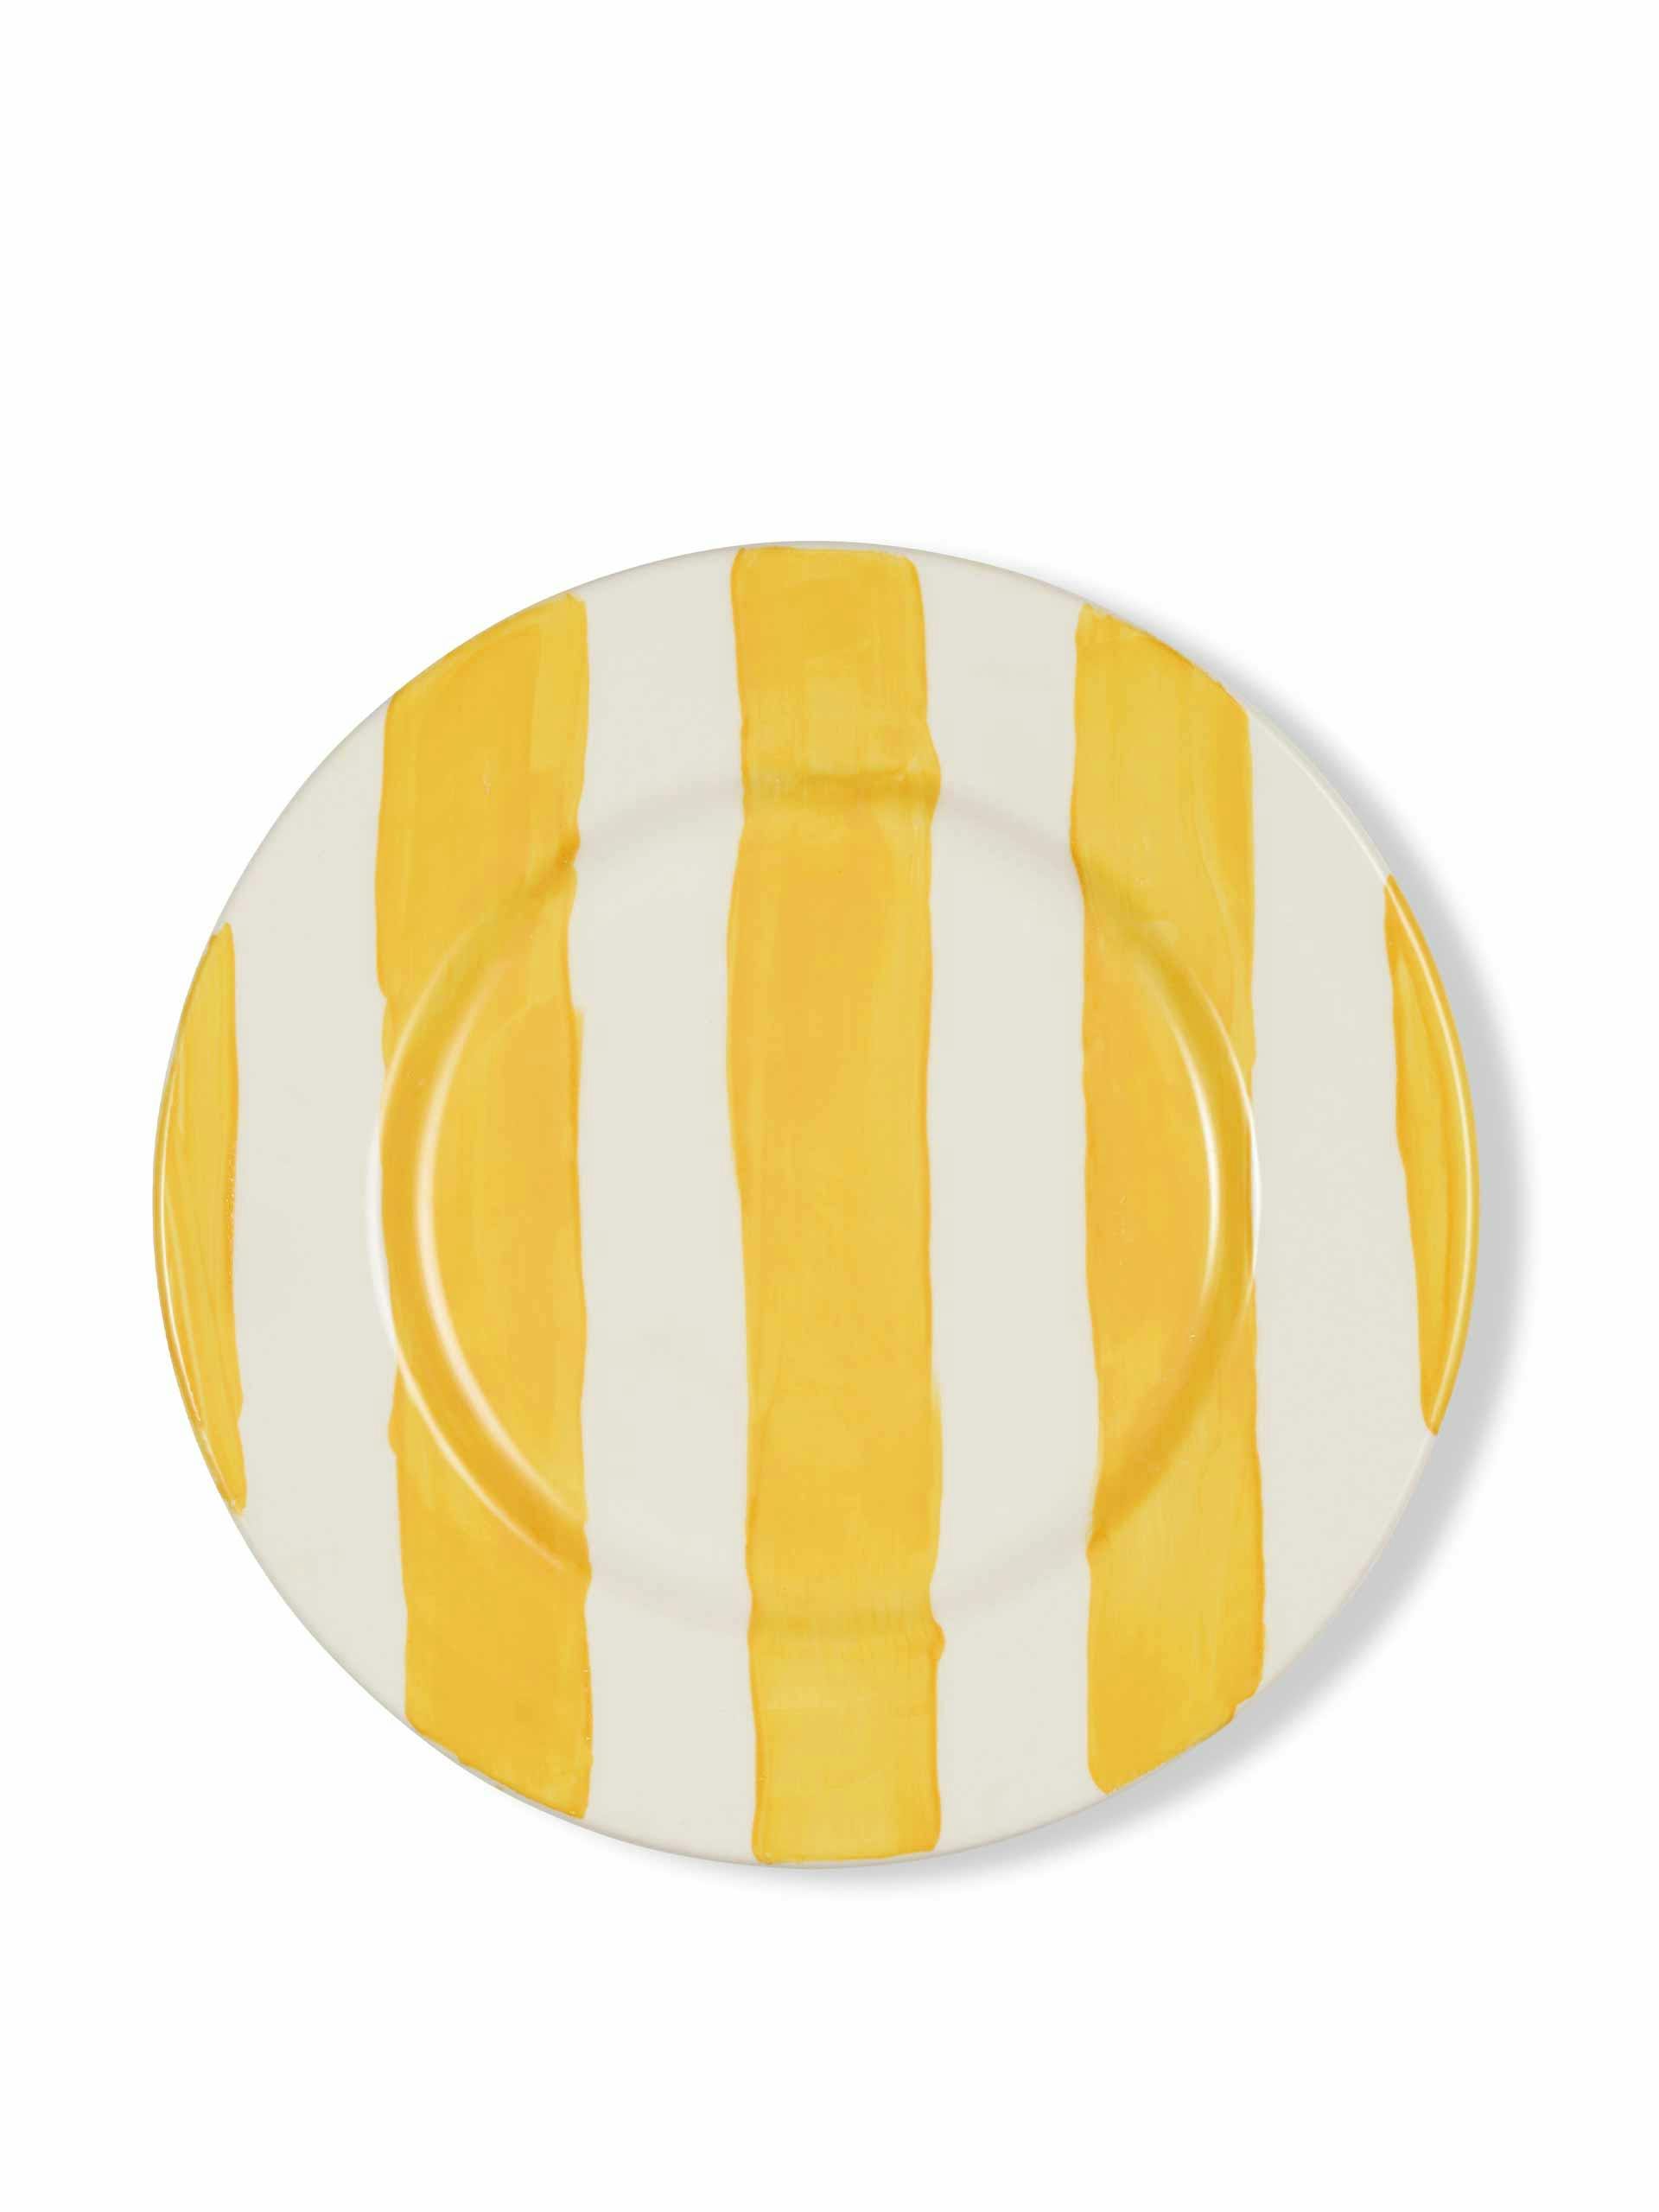 Classic stripe dinner plate in yellow and white